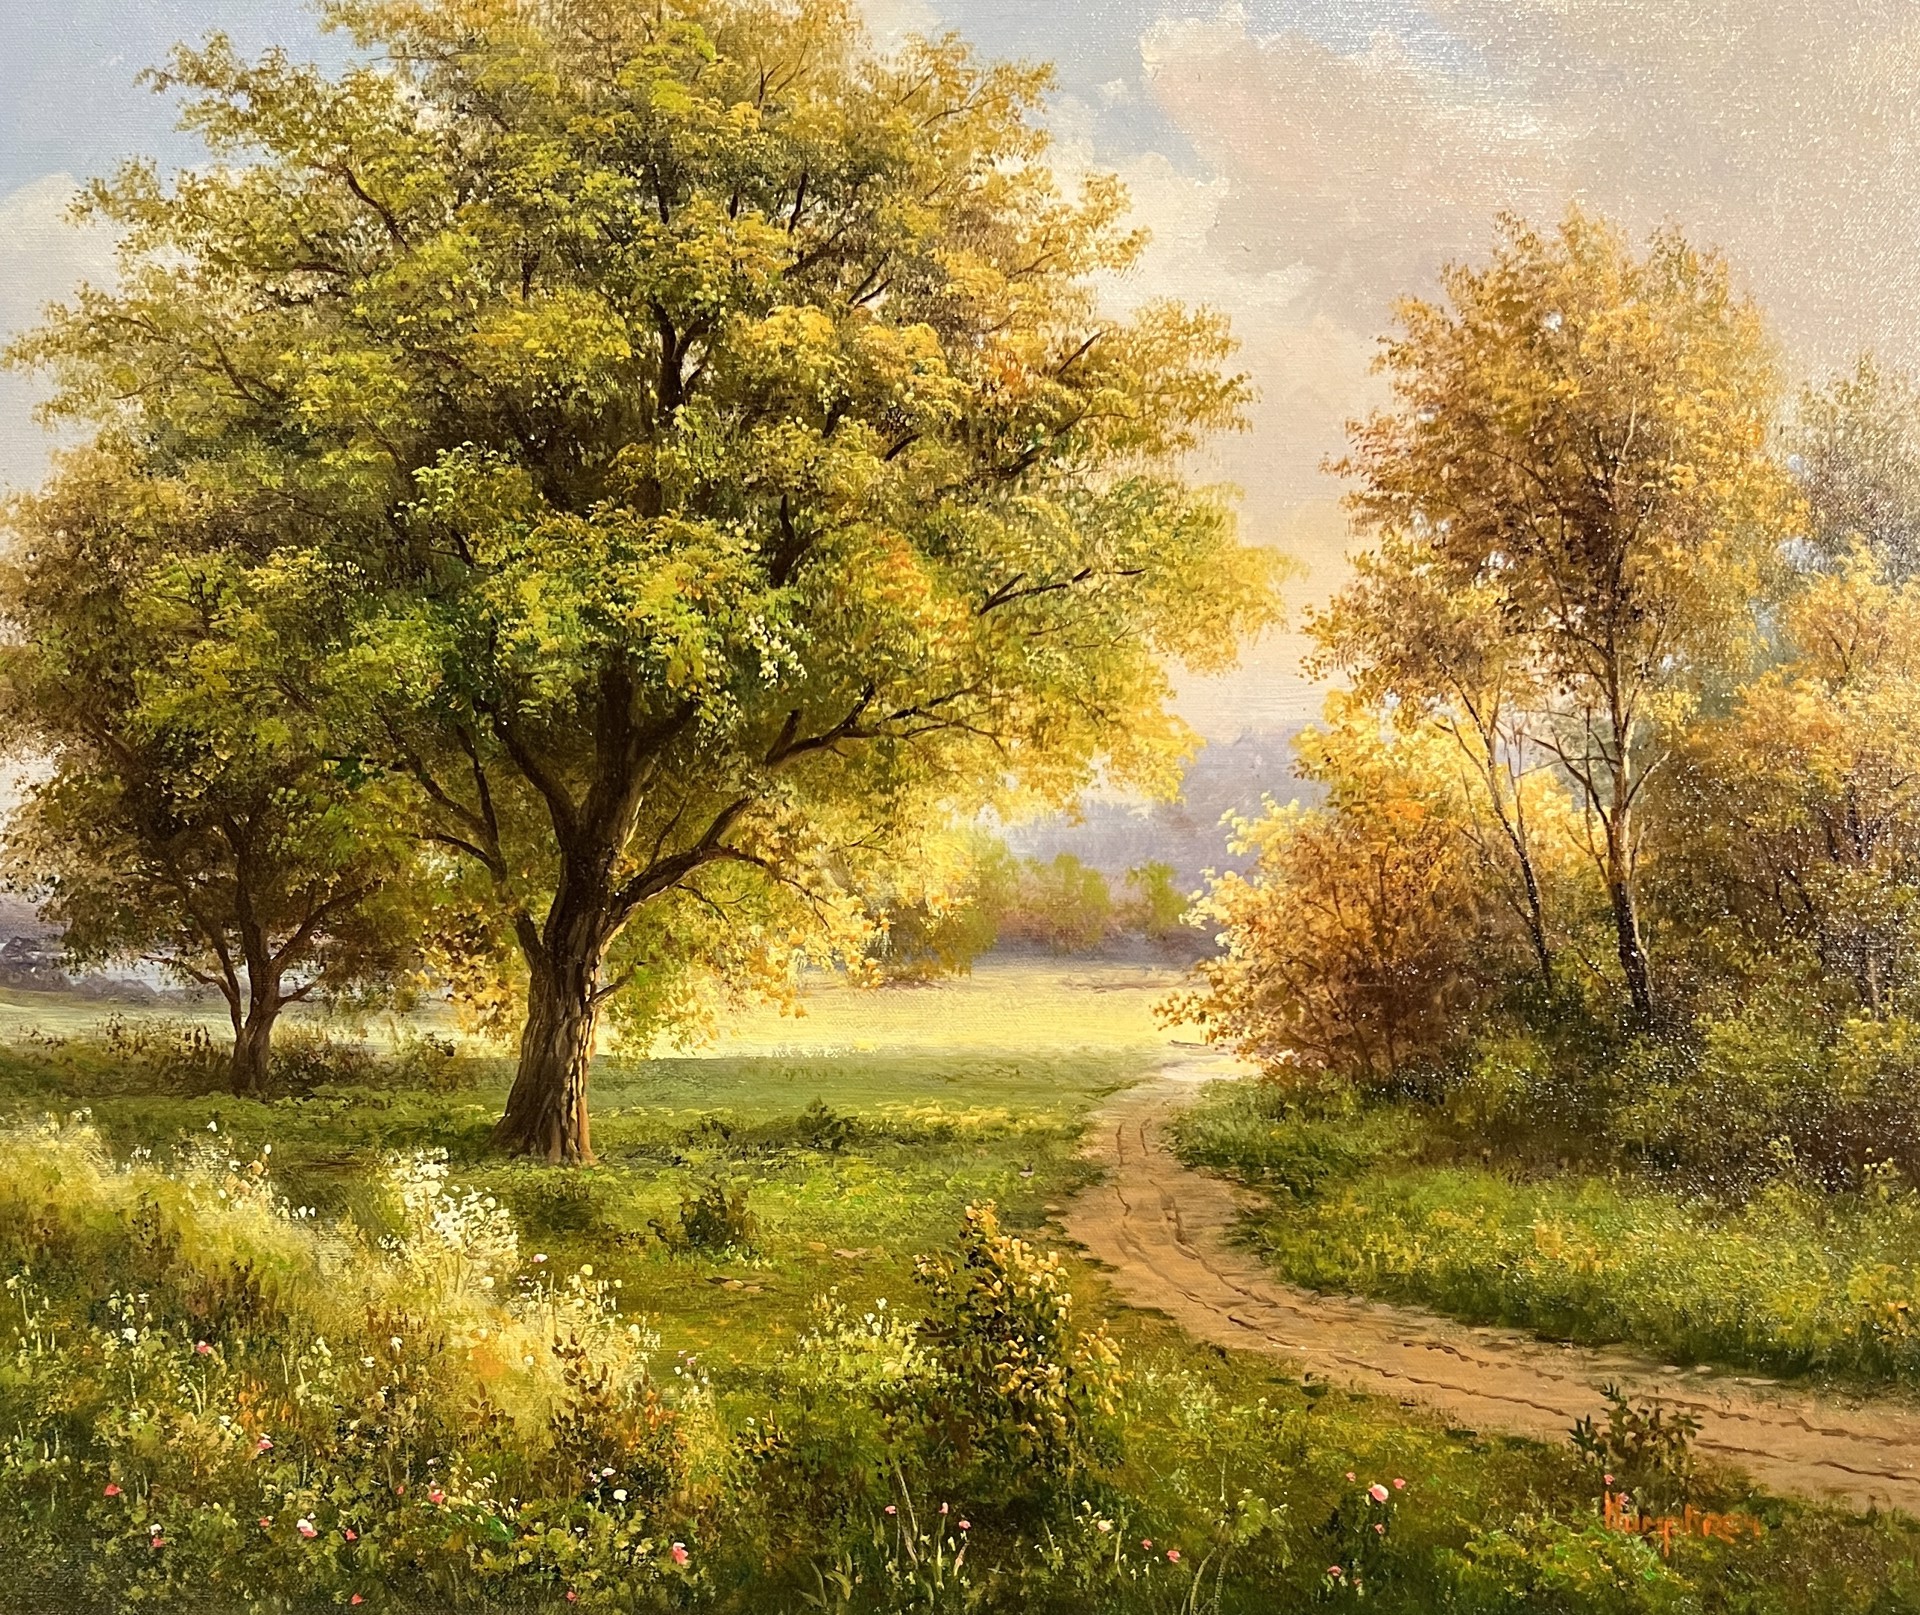 LIGHT IN THE FIELD by HUMPHREY